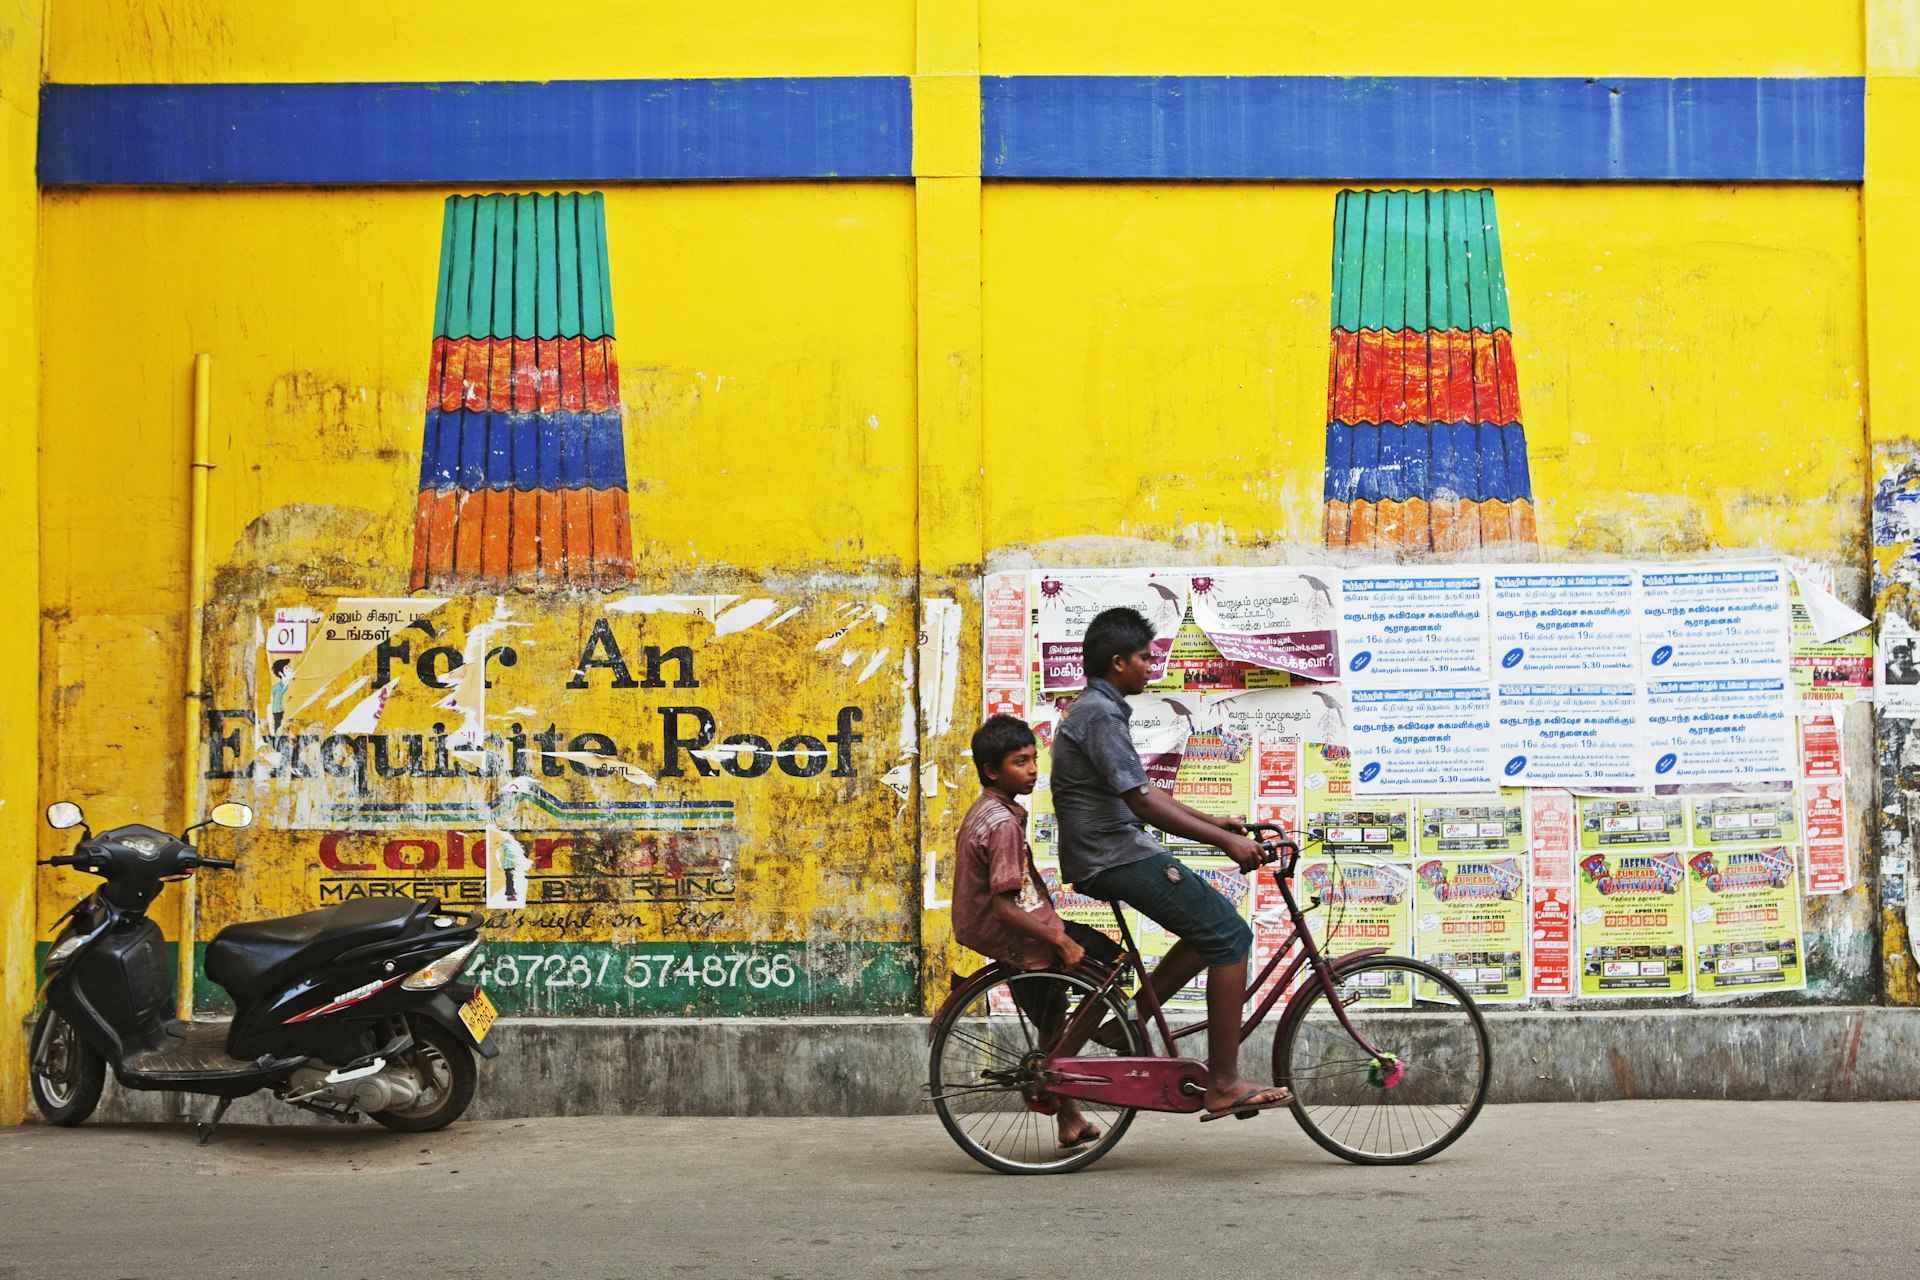 Two young men on a bicycle in front of a bright yellow wall in Jaffna, Sri Lanka